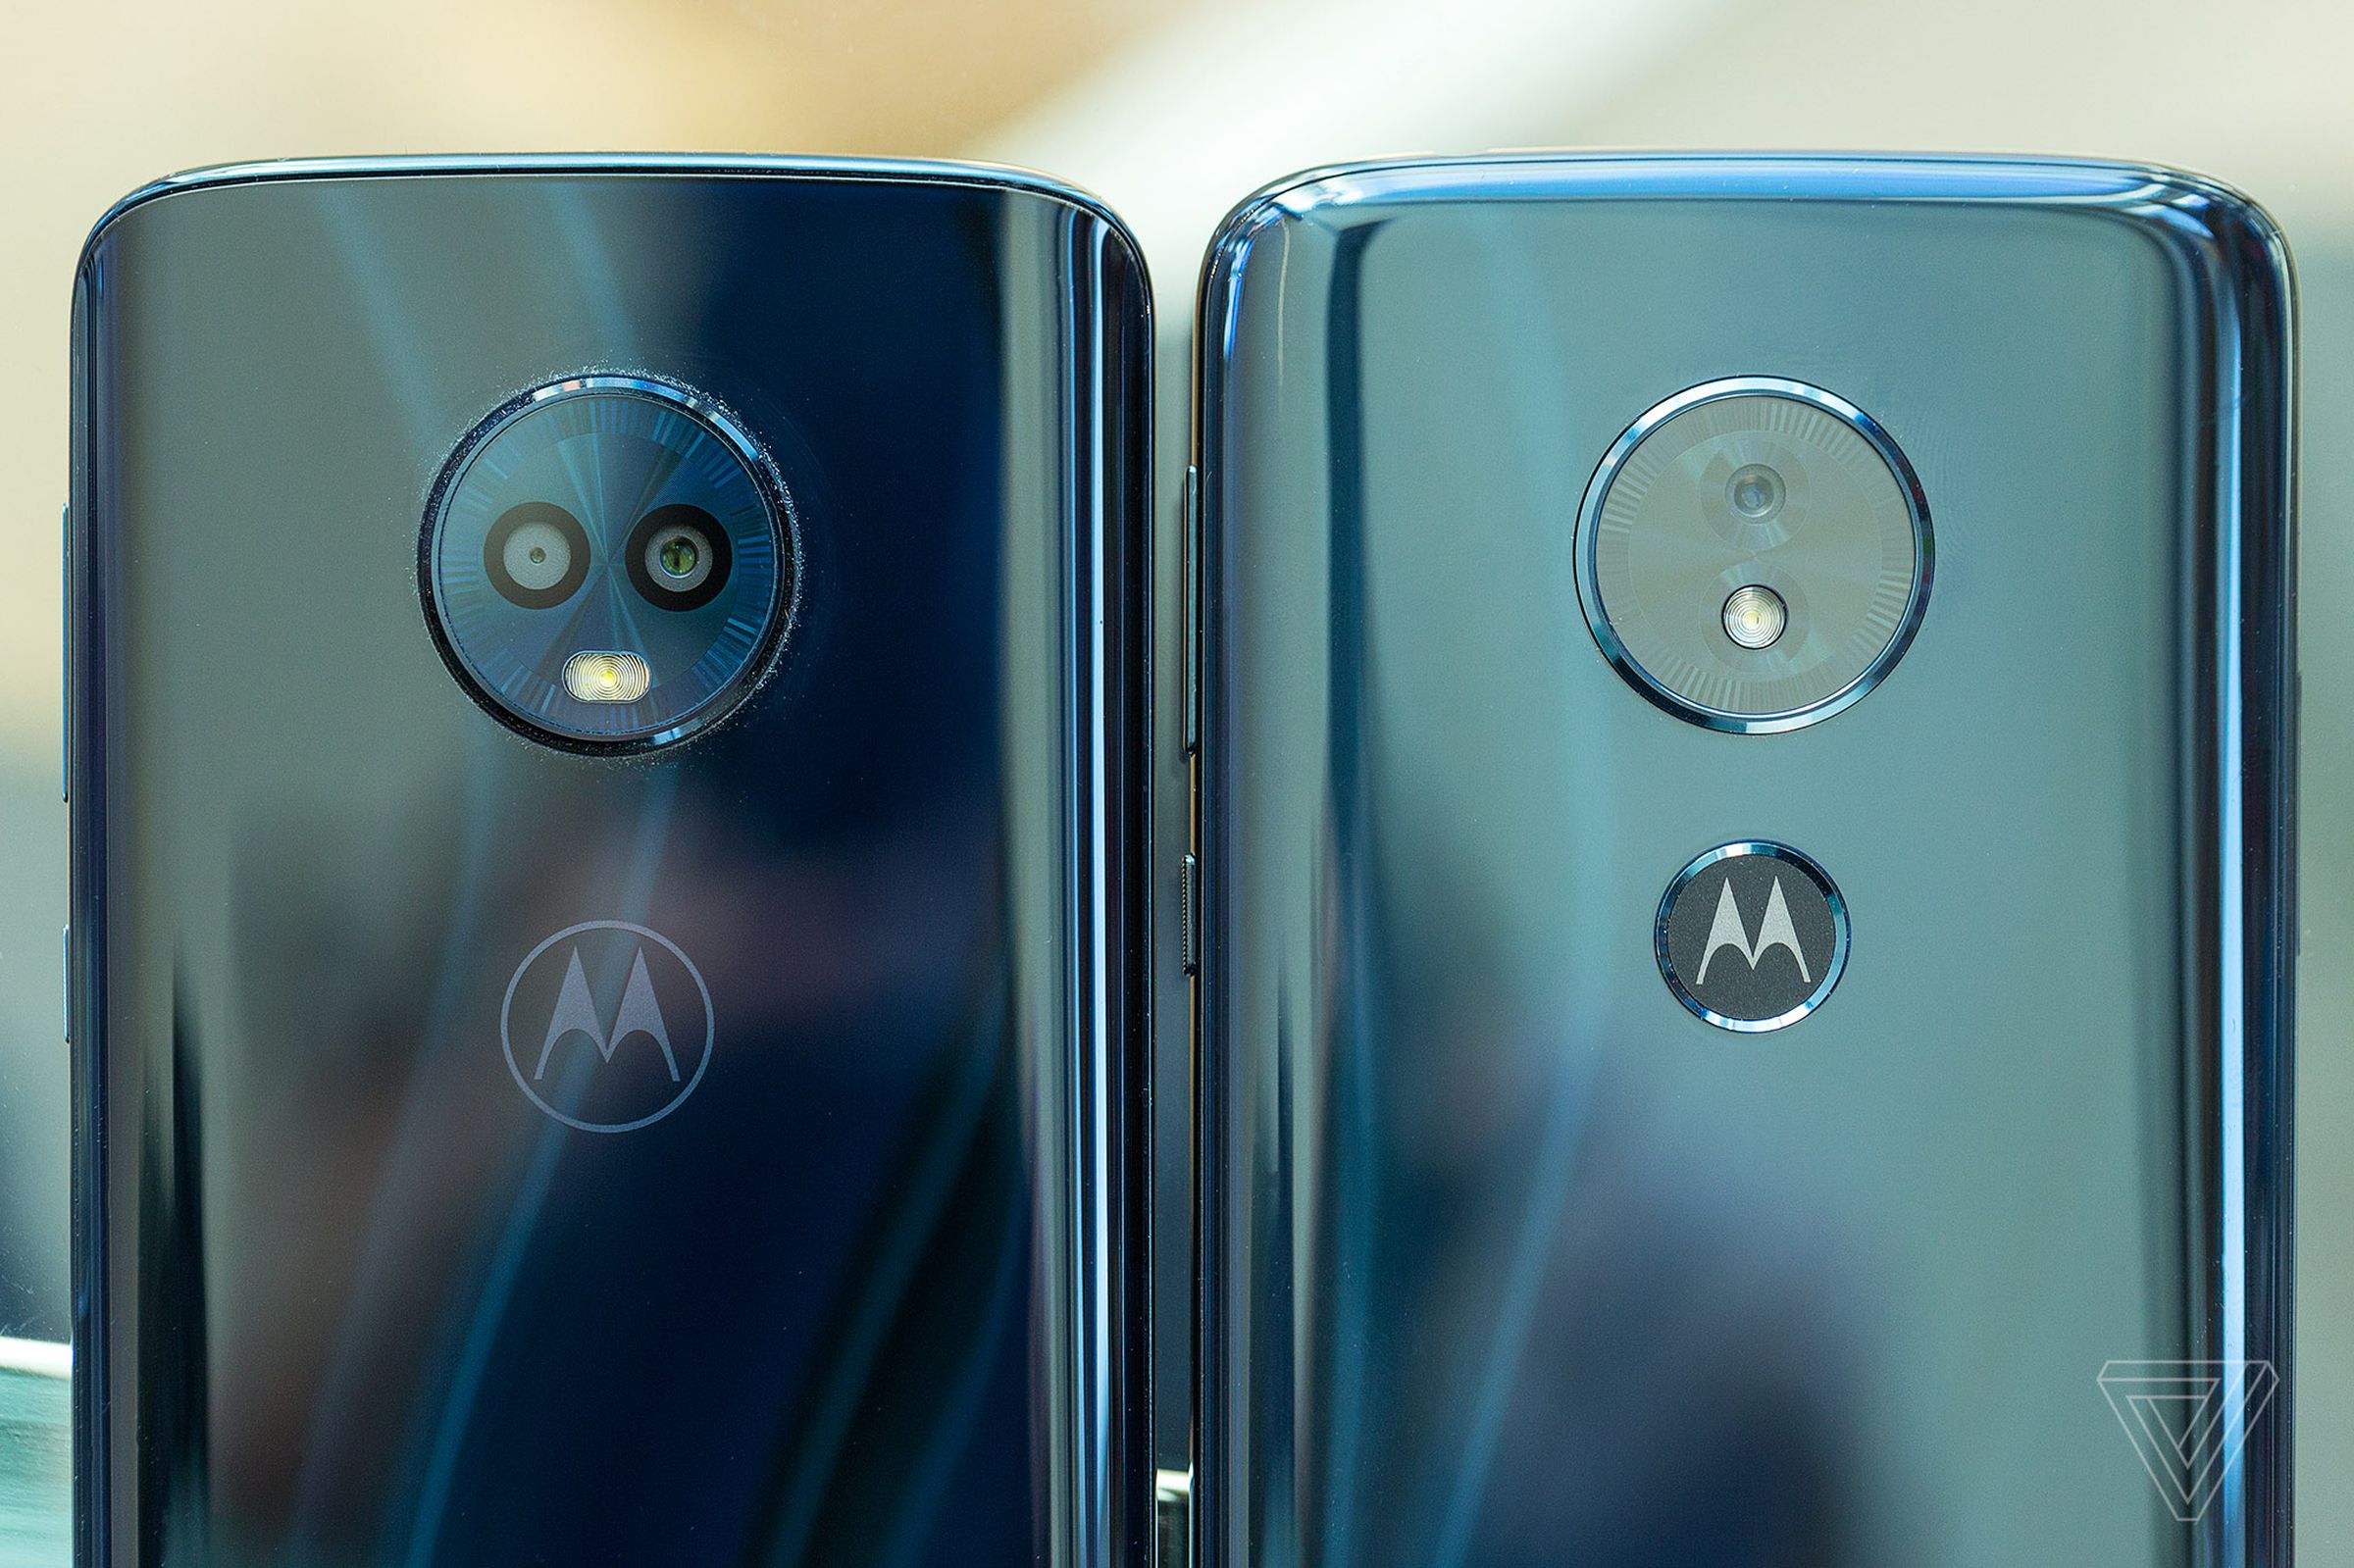 Moto G6 (left) and G6 Play (right)